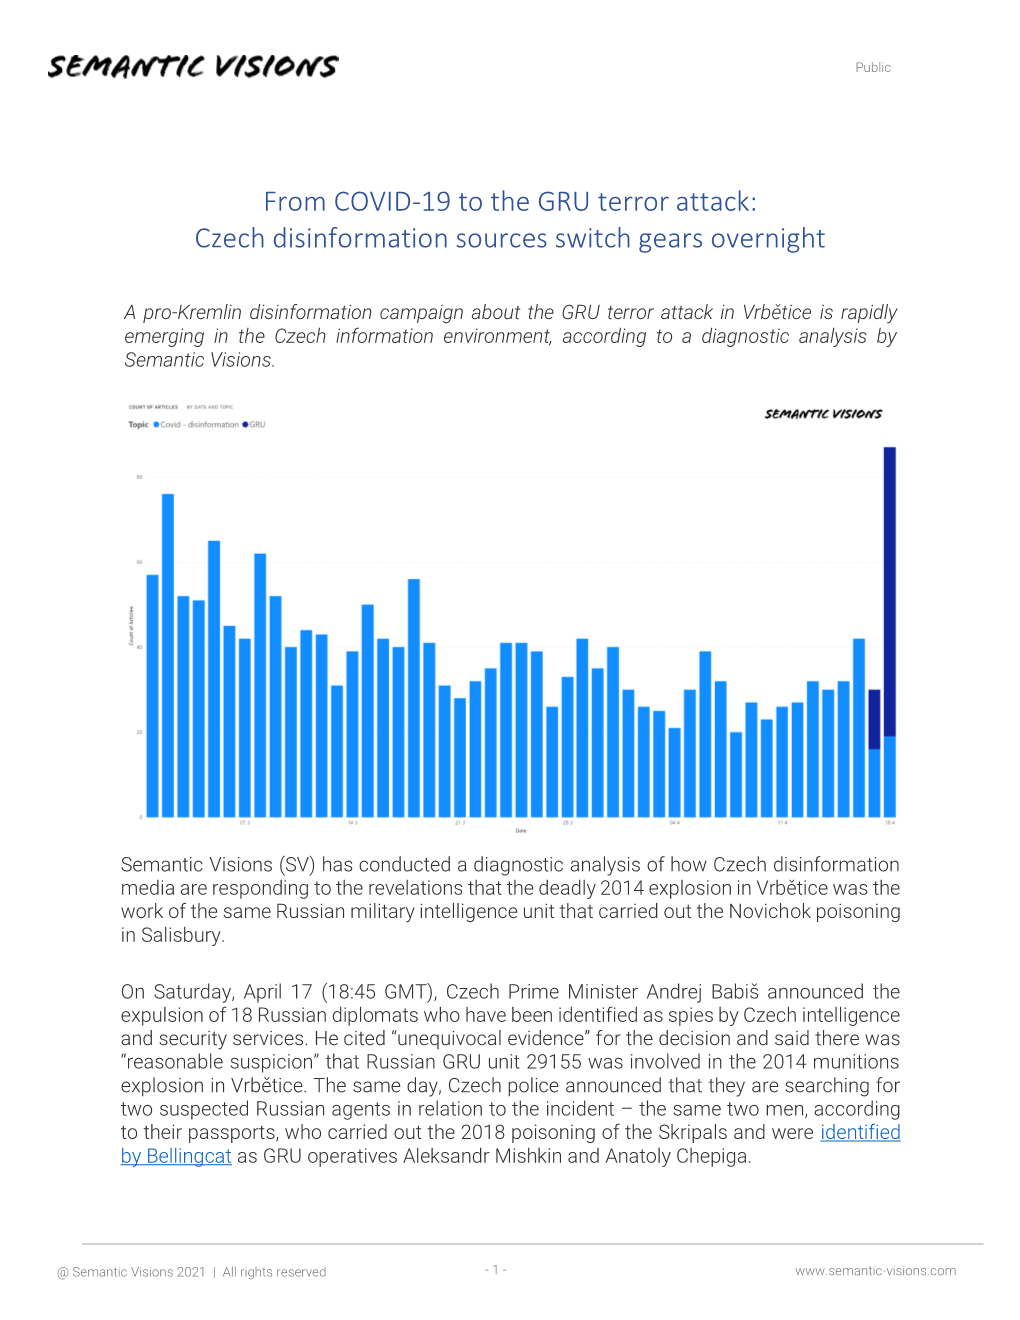 From COVID-19 to the GRU Terror Attack: Czech Disinformation Sources Switch Gears Overnight